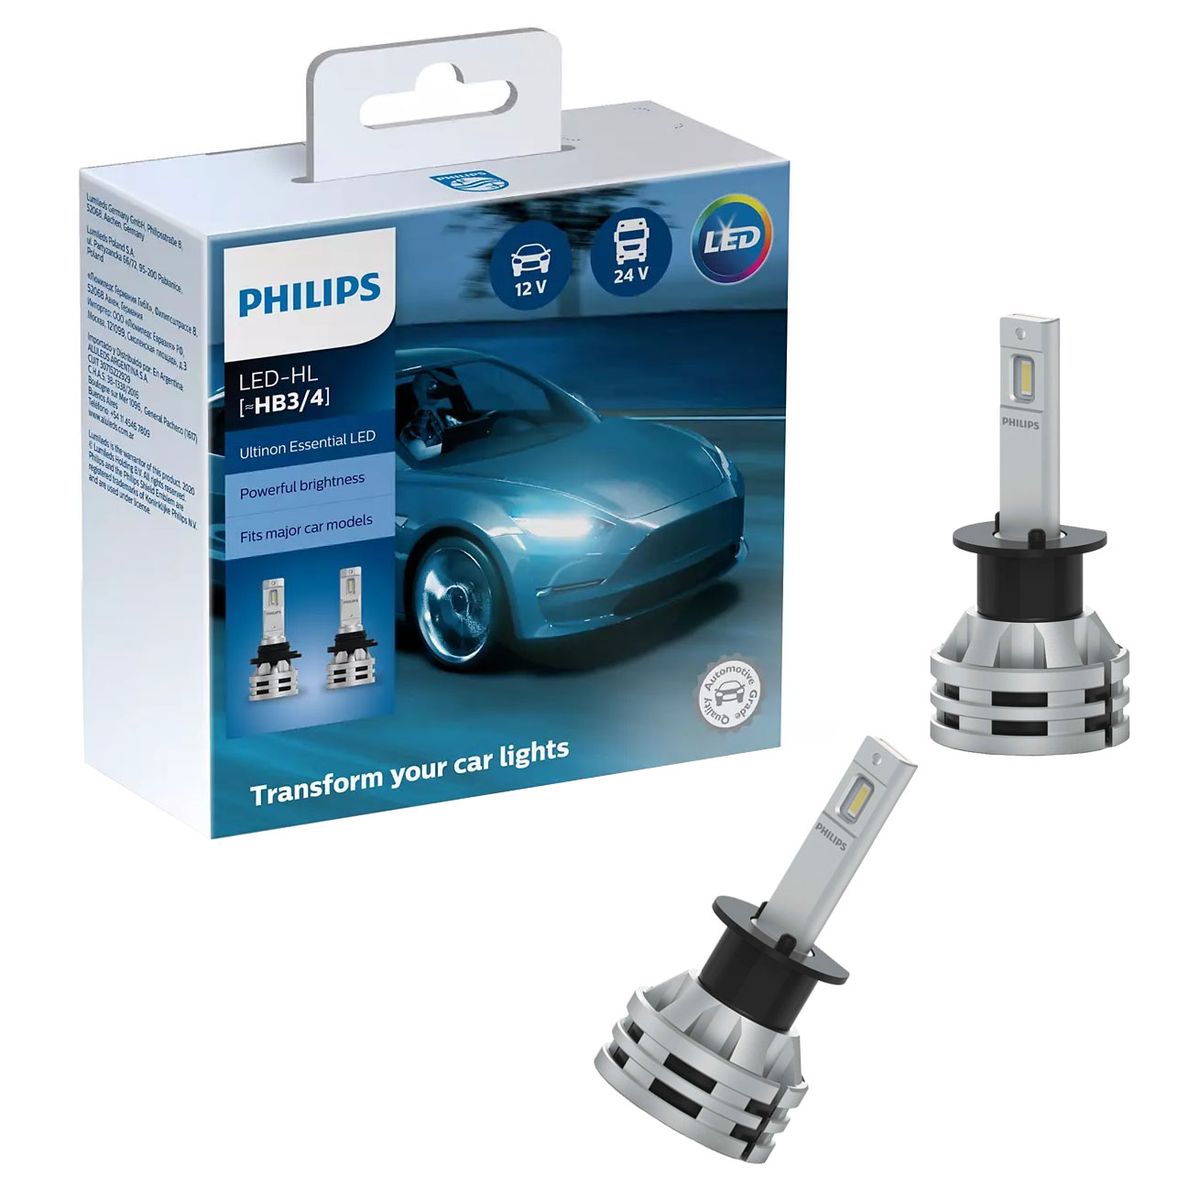 Philips Led Headlight Bulb Ultinon Pro1000 LED-HL HB3/HB4 Bright Stylish  Ligh, Up To 6500 K, Car Parts & Accessories, Lightings, Horns, and other  Electrical Parts and Accessories on Carousell